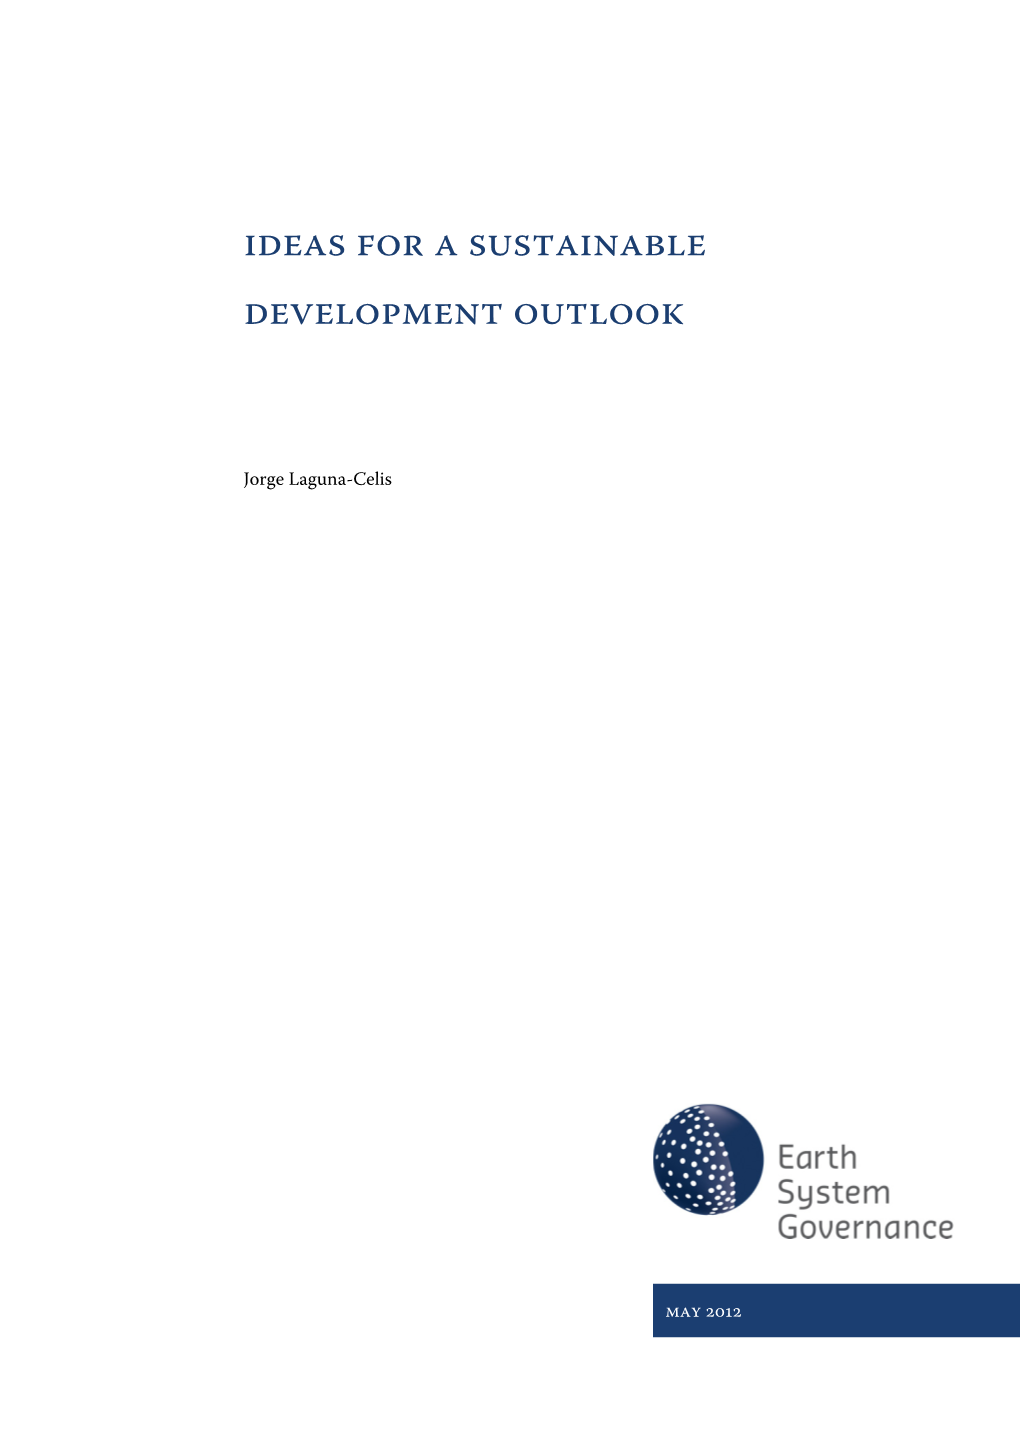 Ideas for a Sustainable Development Outlook